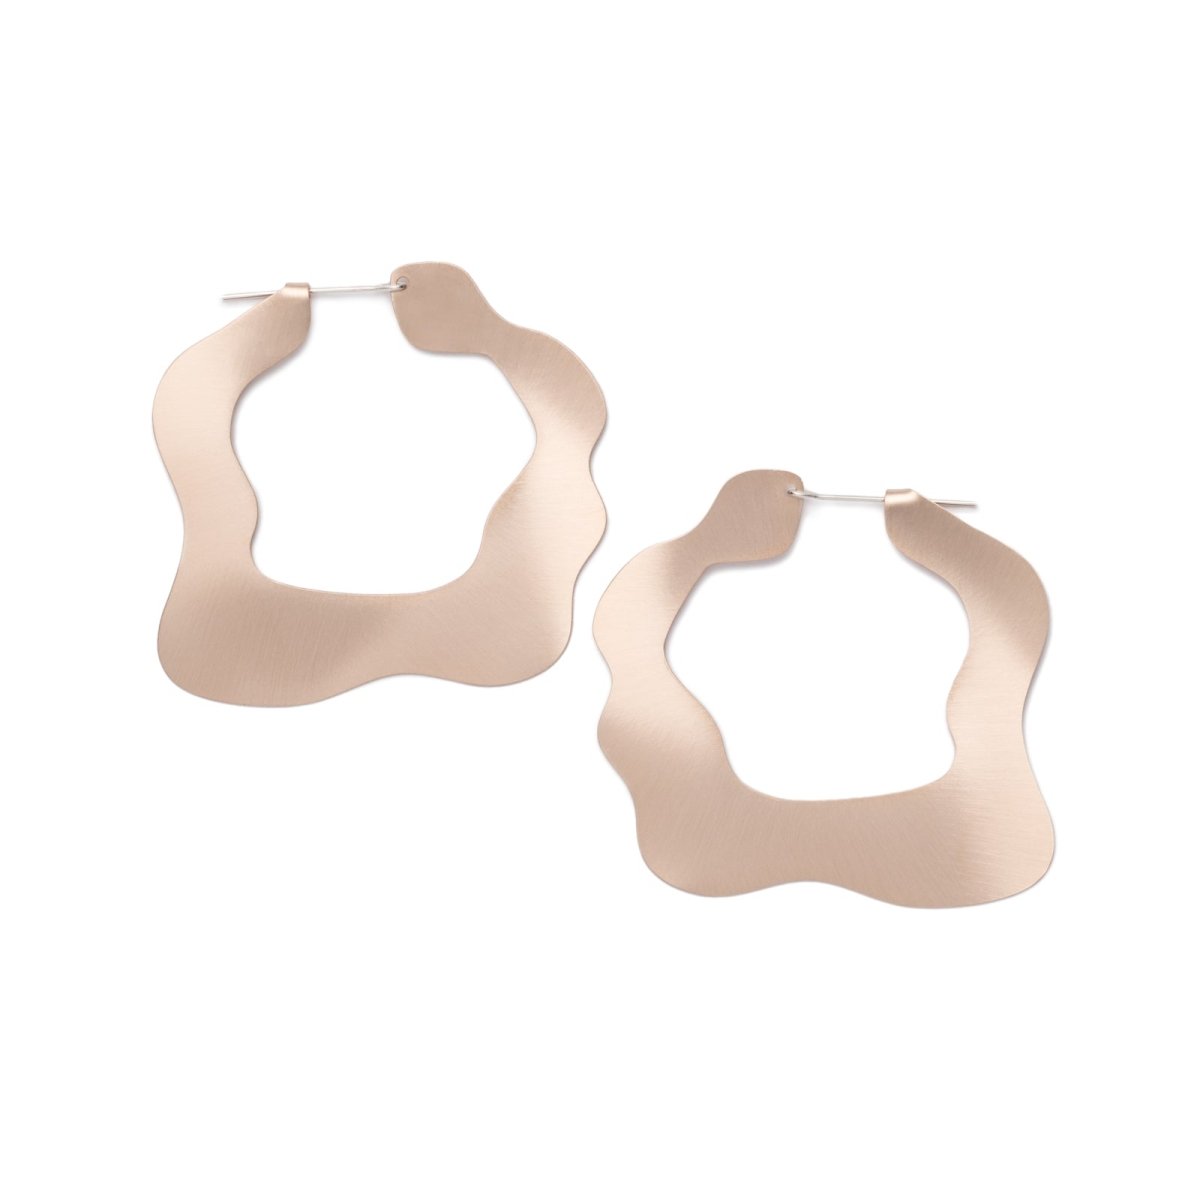 Large, glam, brushed bronze statement hoop earrings, featuring a flat profile and curvy edges, and completed with sterling silver-filled ear wires. Hand-crafted in Portland, Oregon. 